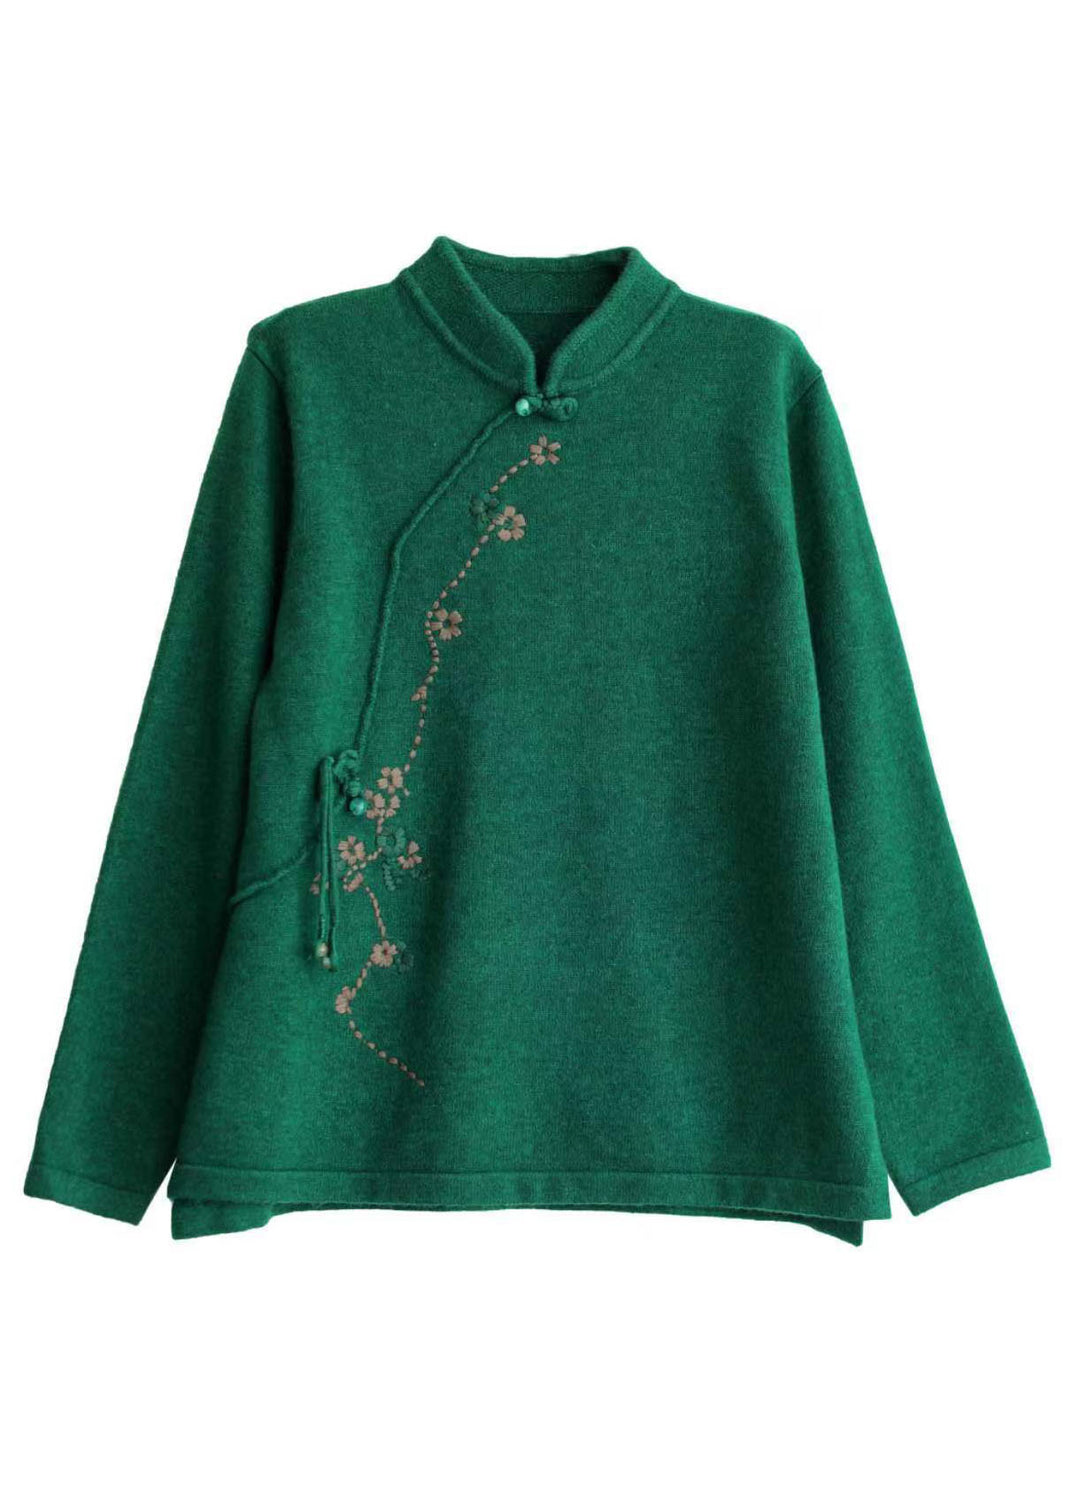 Vintage Green Mandarin Collar Embroideried Knit Sweaters Winter